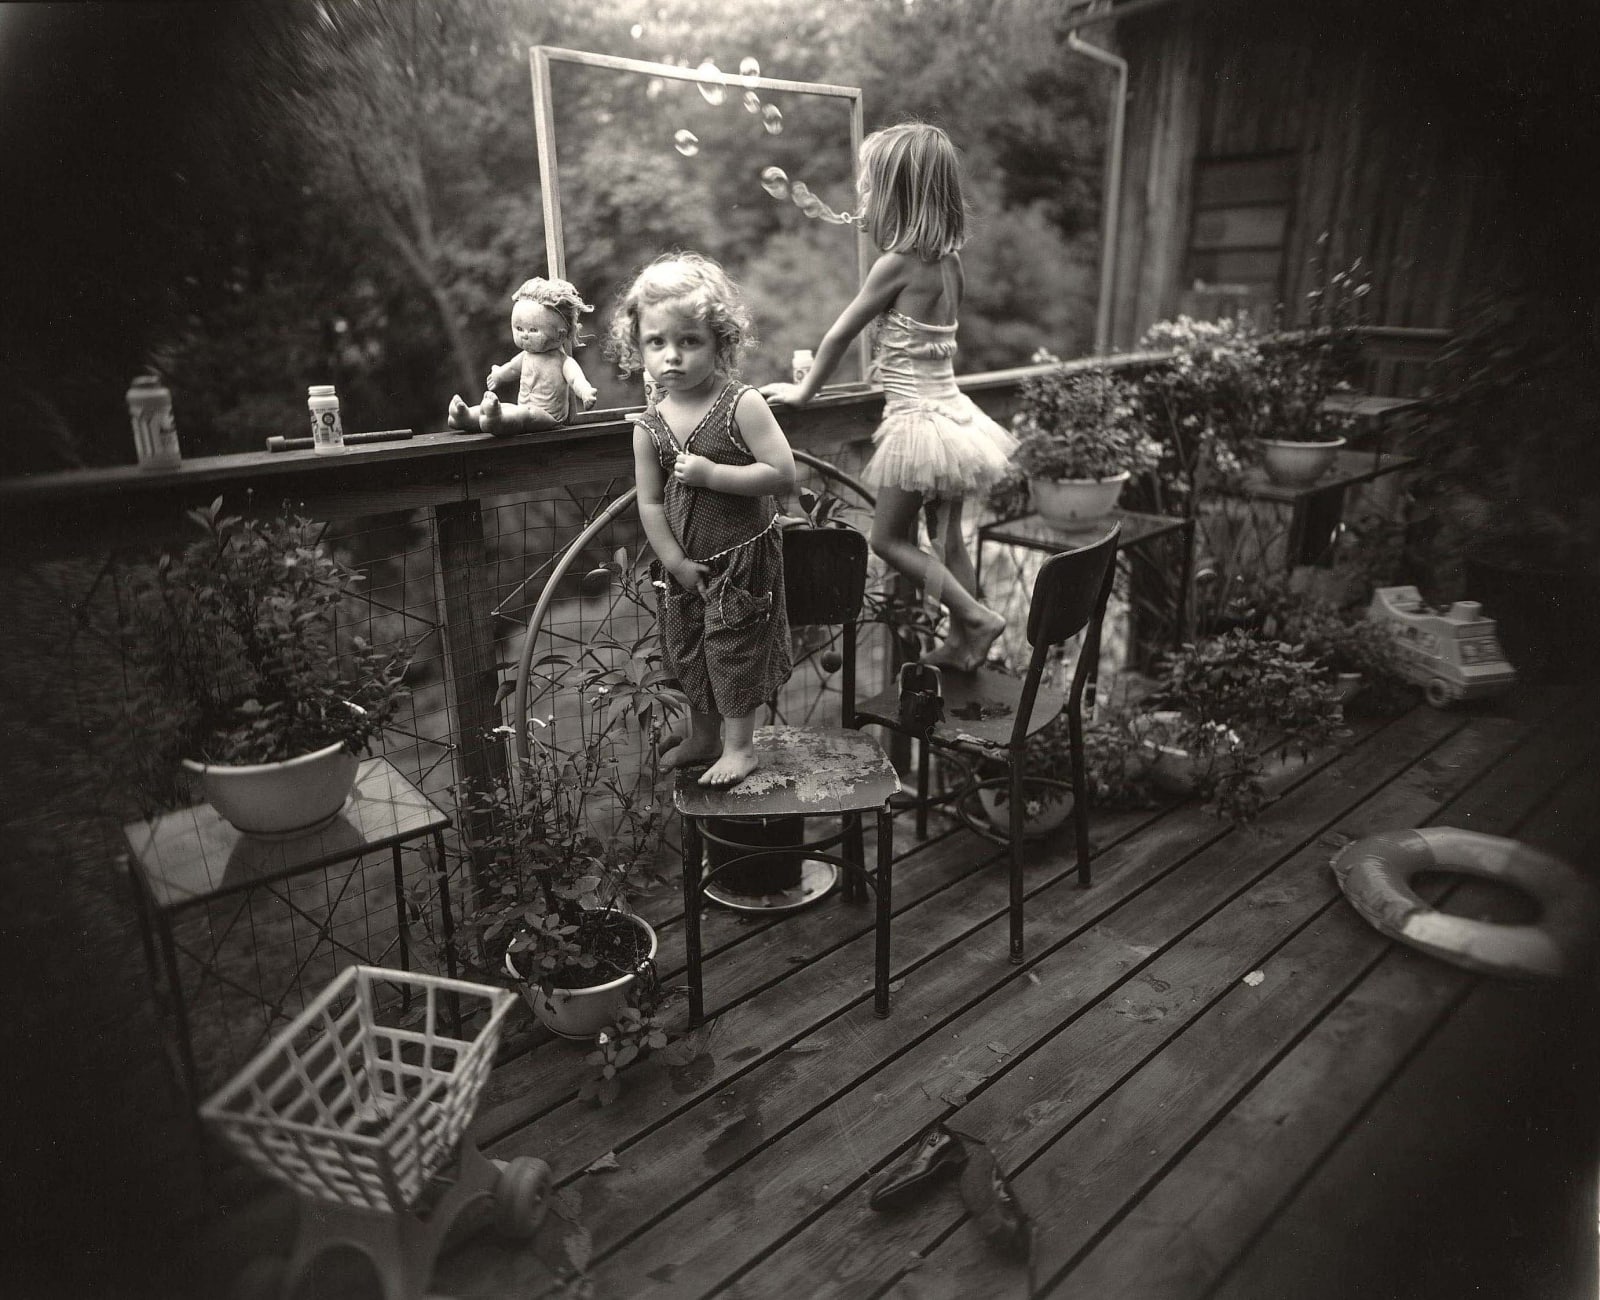 Sally Mann, Blowing Bubbles, 1987